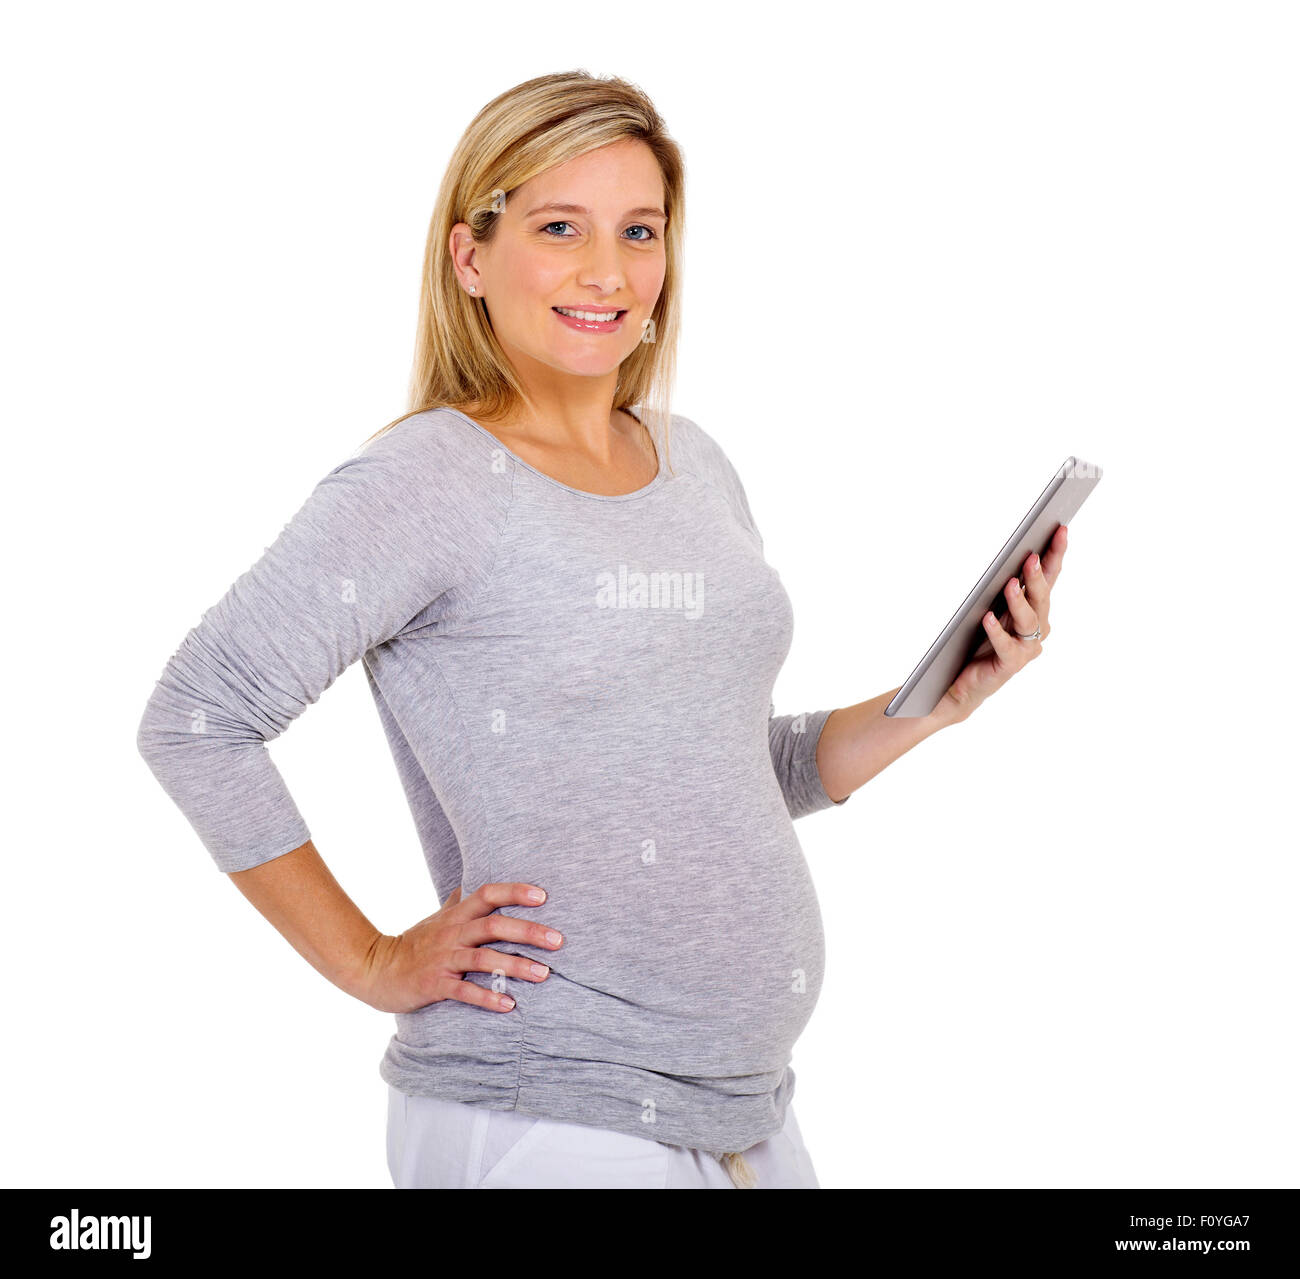 happy young pregnant woman holding tablet computer Stock Photo